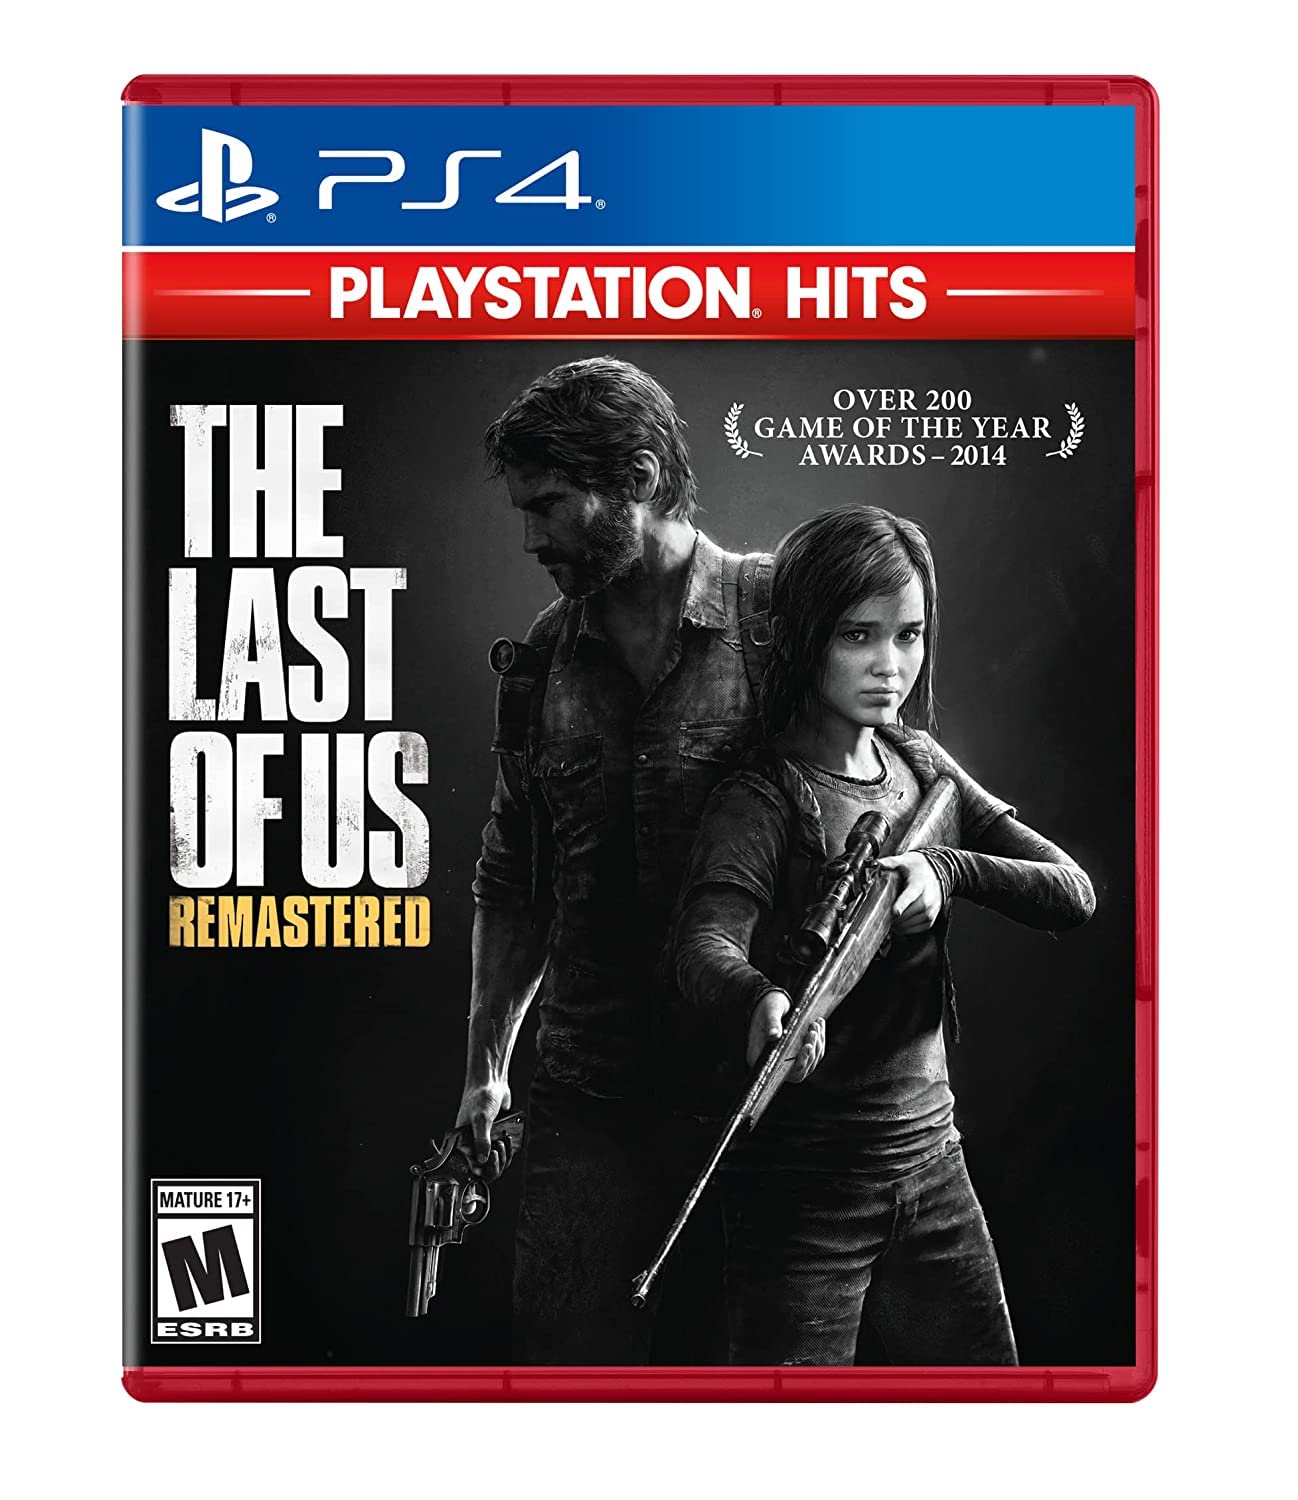 The Last Of Us Remastered (TLOU)